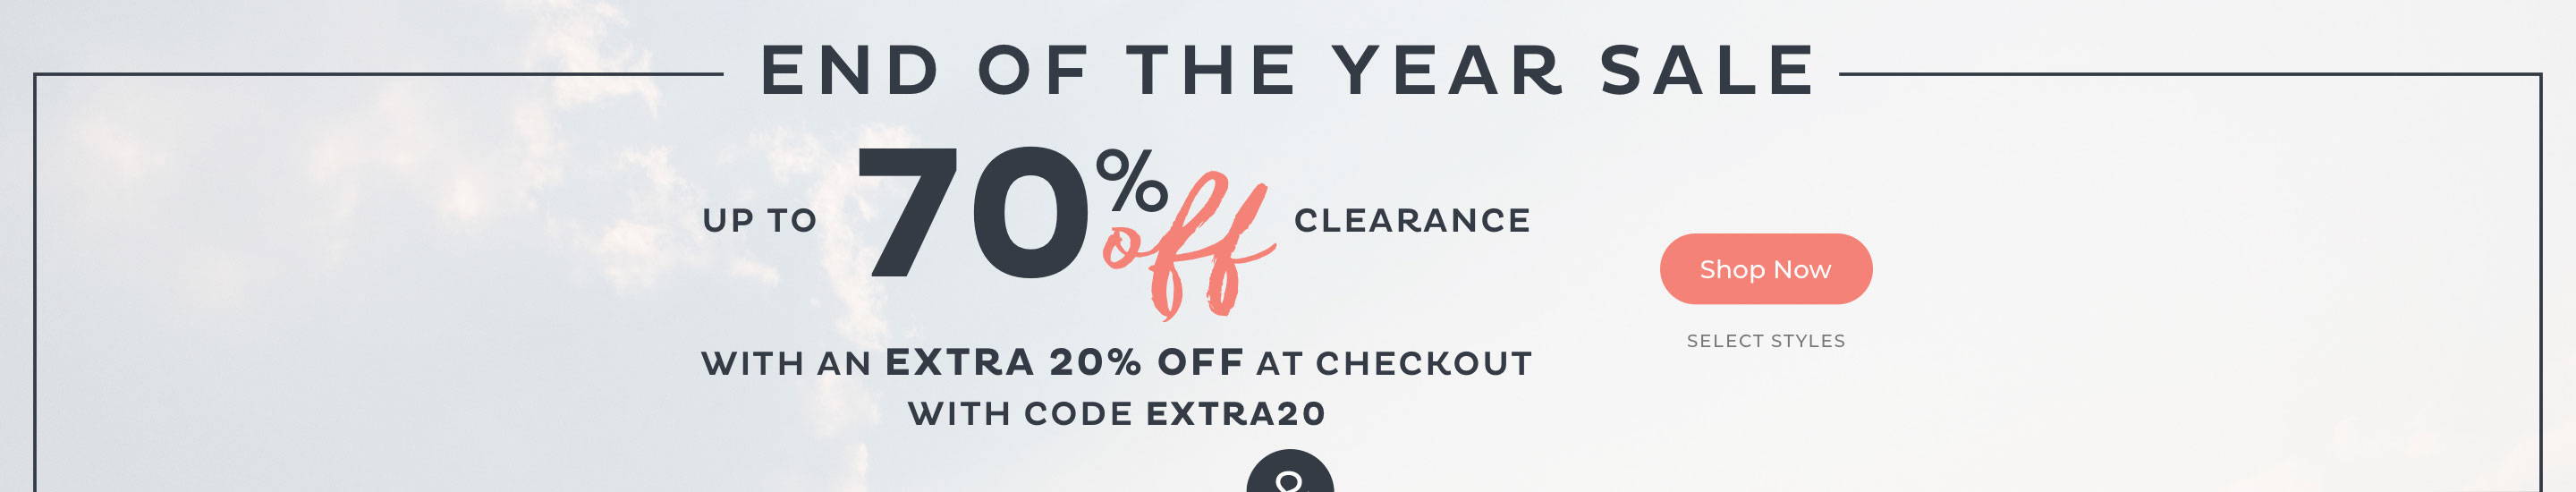 Up to 70% off Clearance